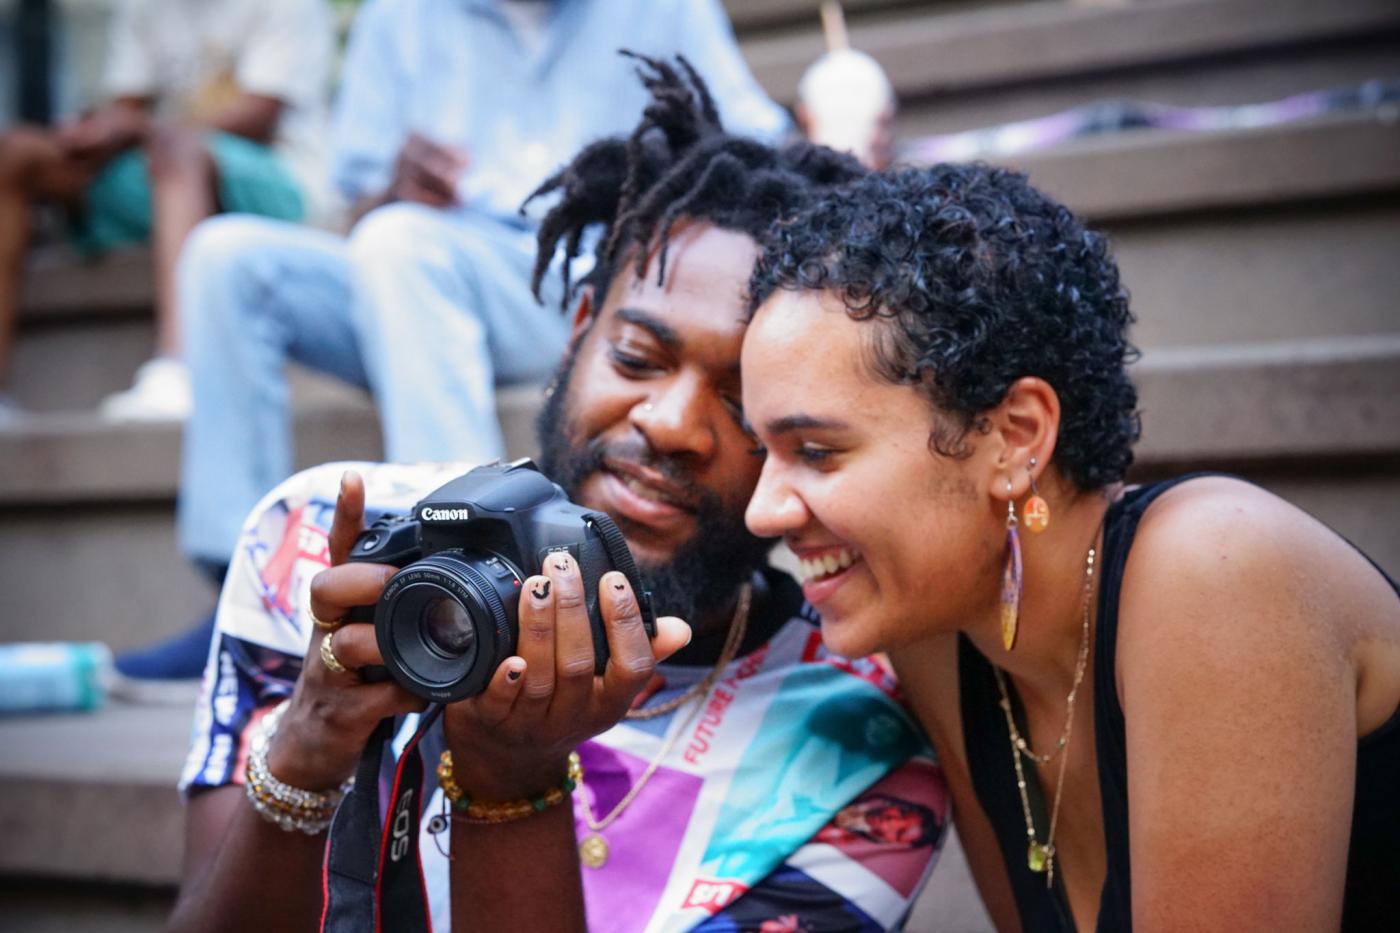 A Black man and woman look at the backside of a digital camera together and smile.